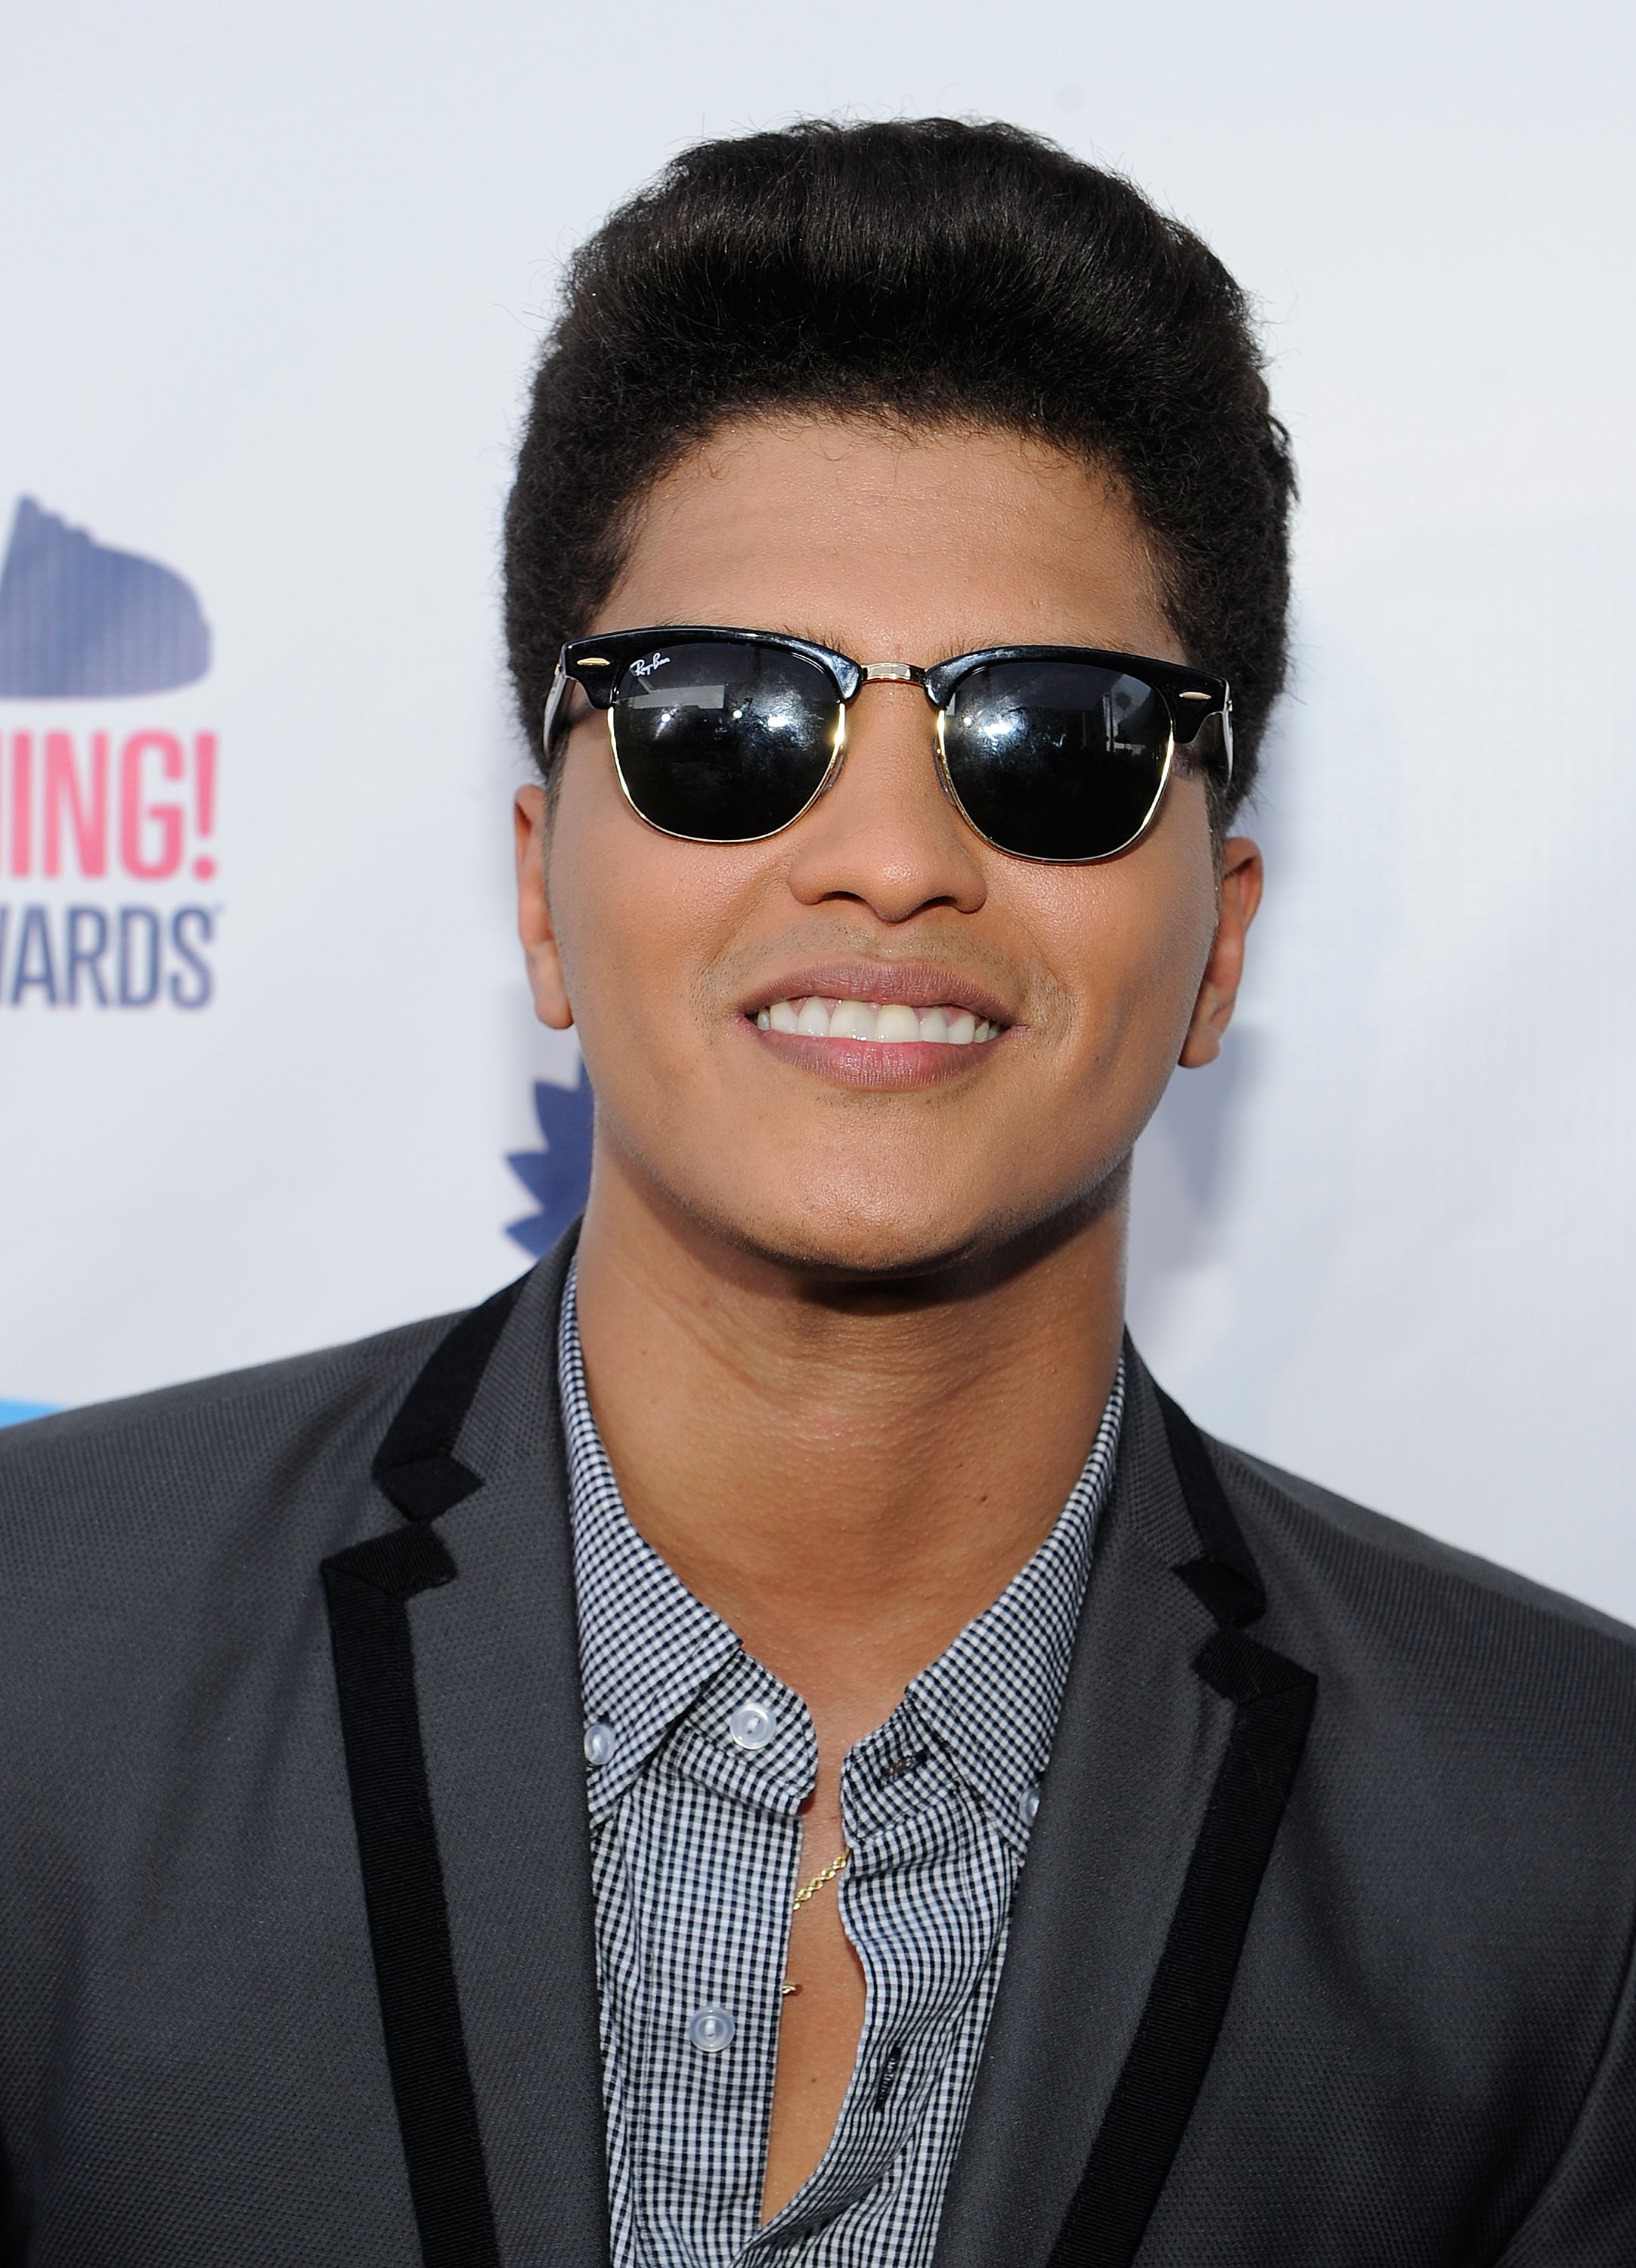 Bruno Mars arriving at the 2010 VH1 Do Something! Awards at the Hollywood Palladium on July 19, 2010 in Hollywood, California. / Source: Getty Images